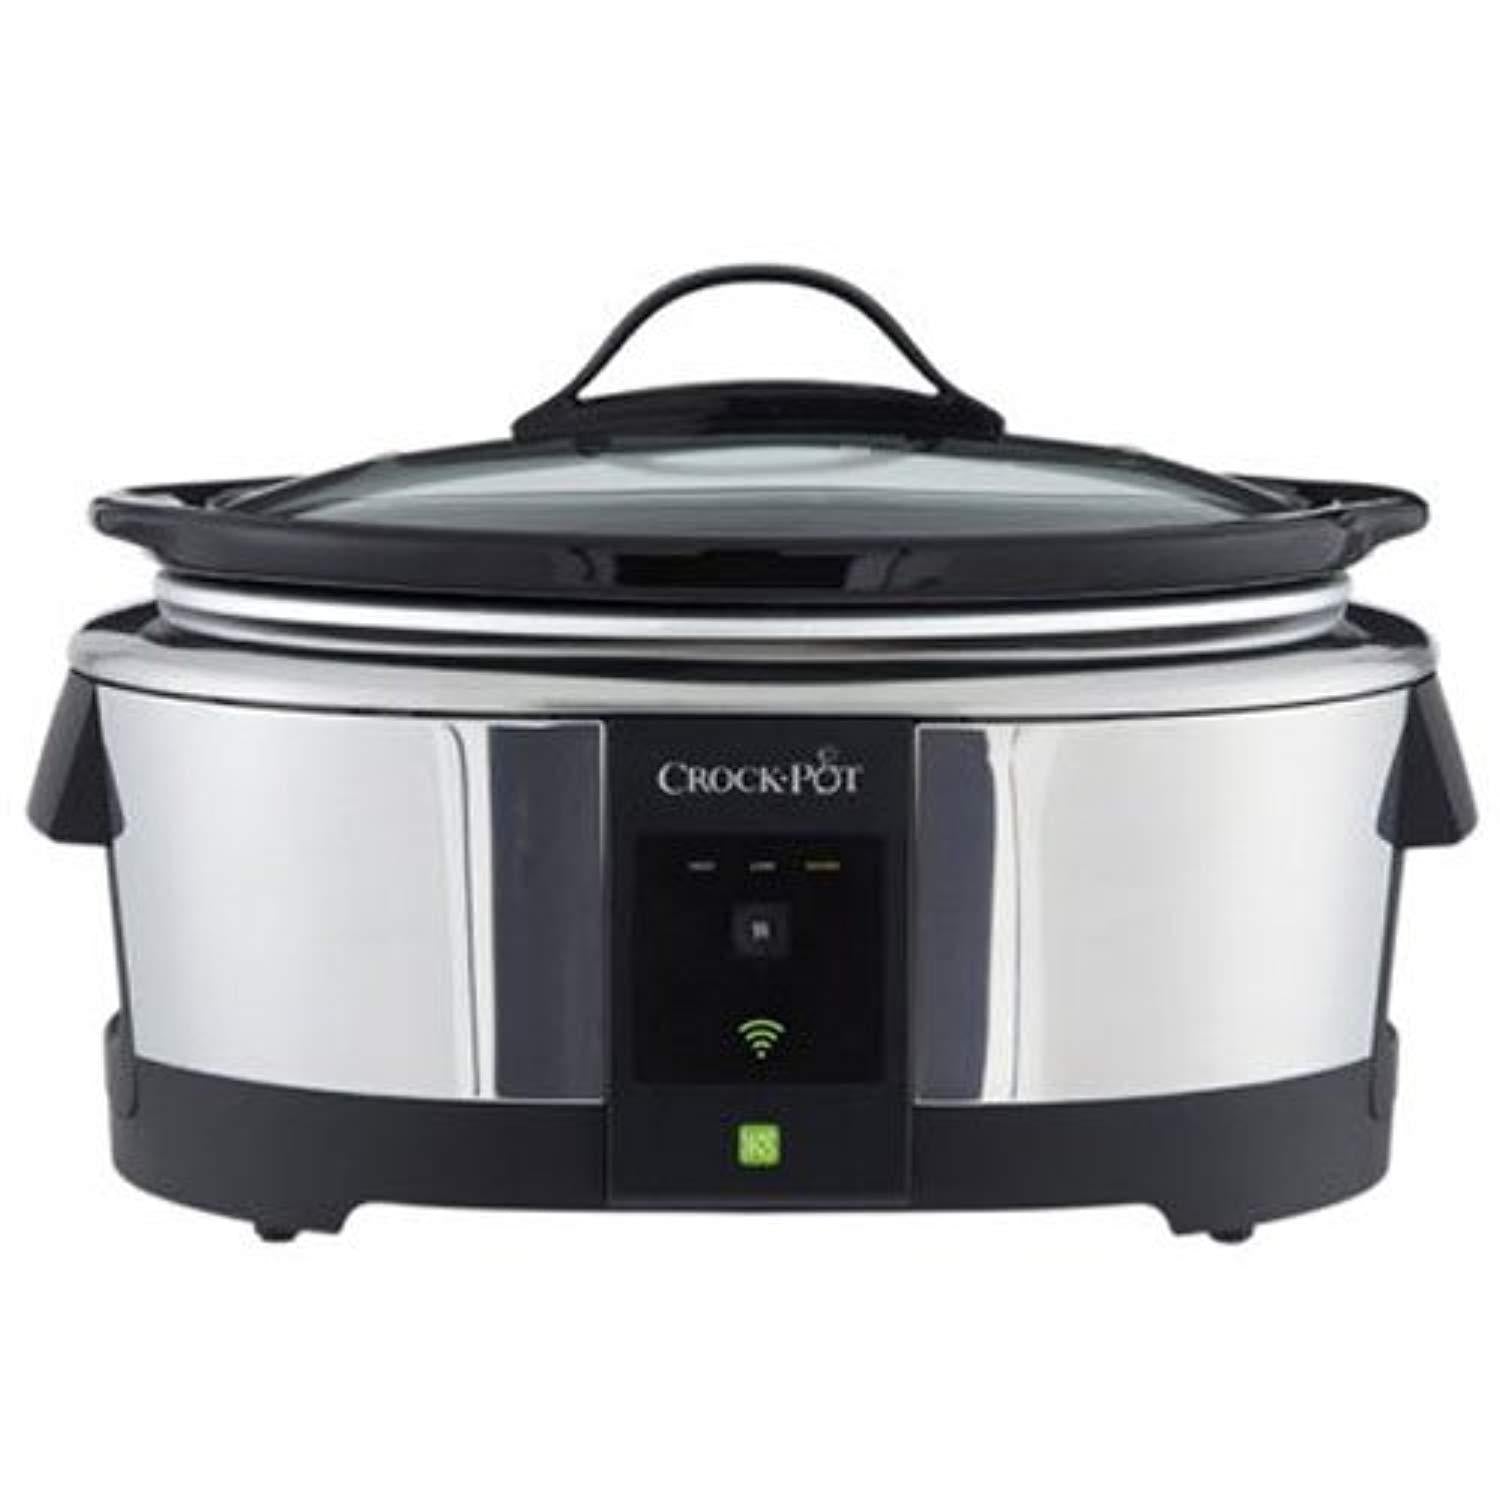 Crock-Pot Wifi-Controlled Smart Slow Cooker Enabled by WeMo, 6-Quart,  Stainless Steel (SCCPWM600-V1) 